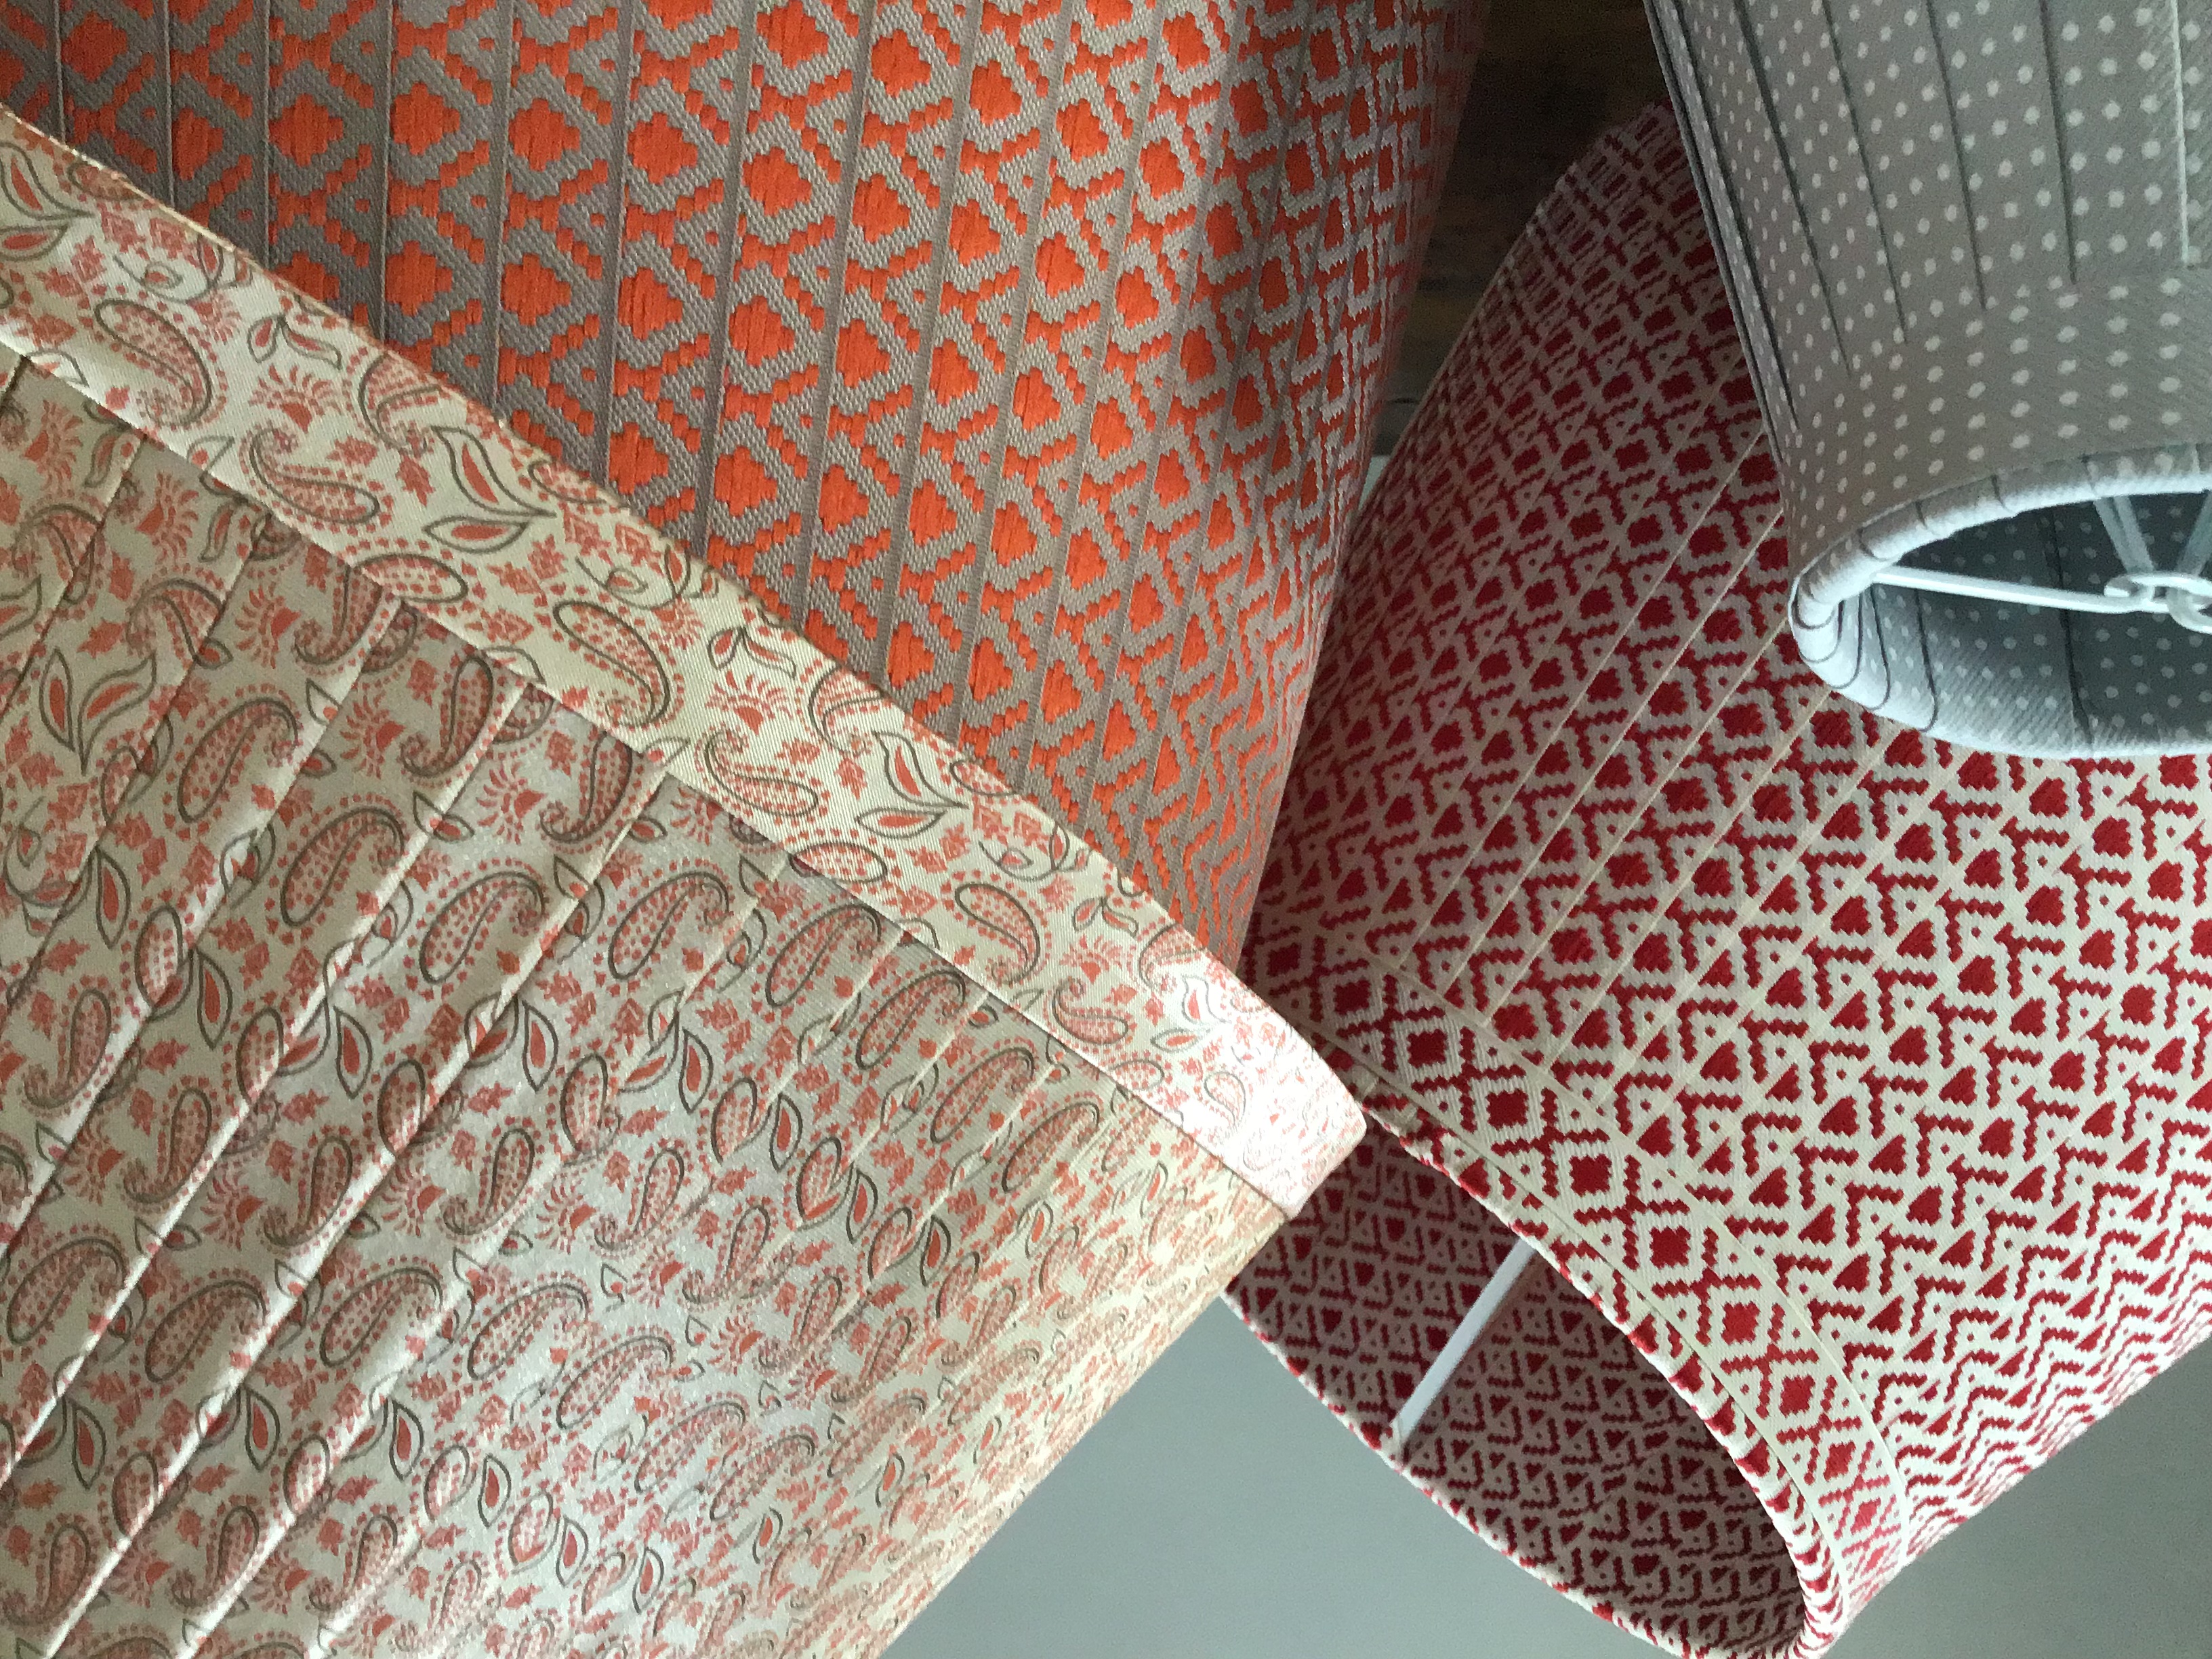 Close up of orange and red ribbon lampshades